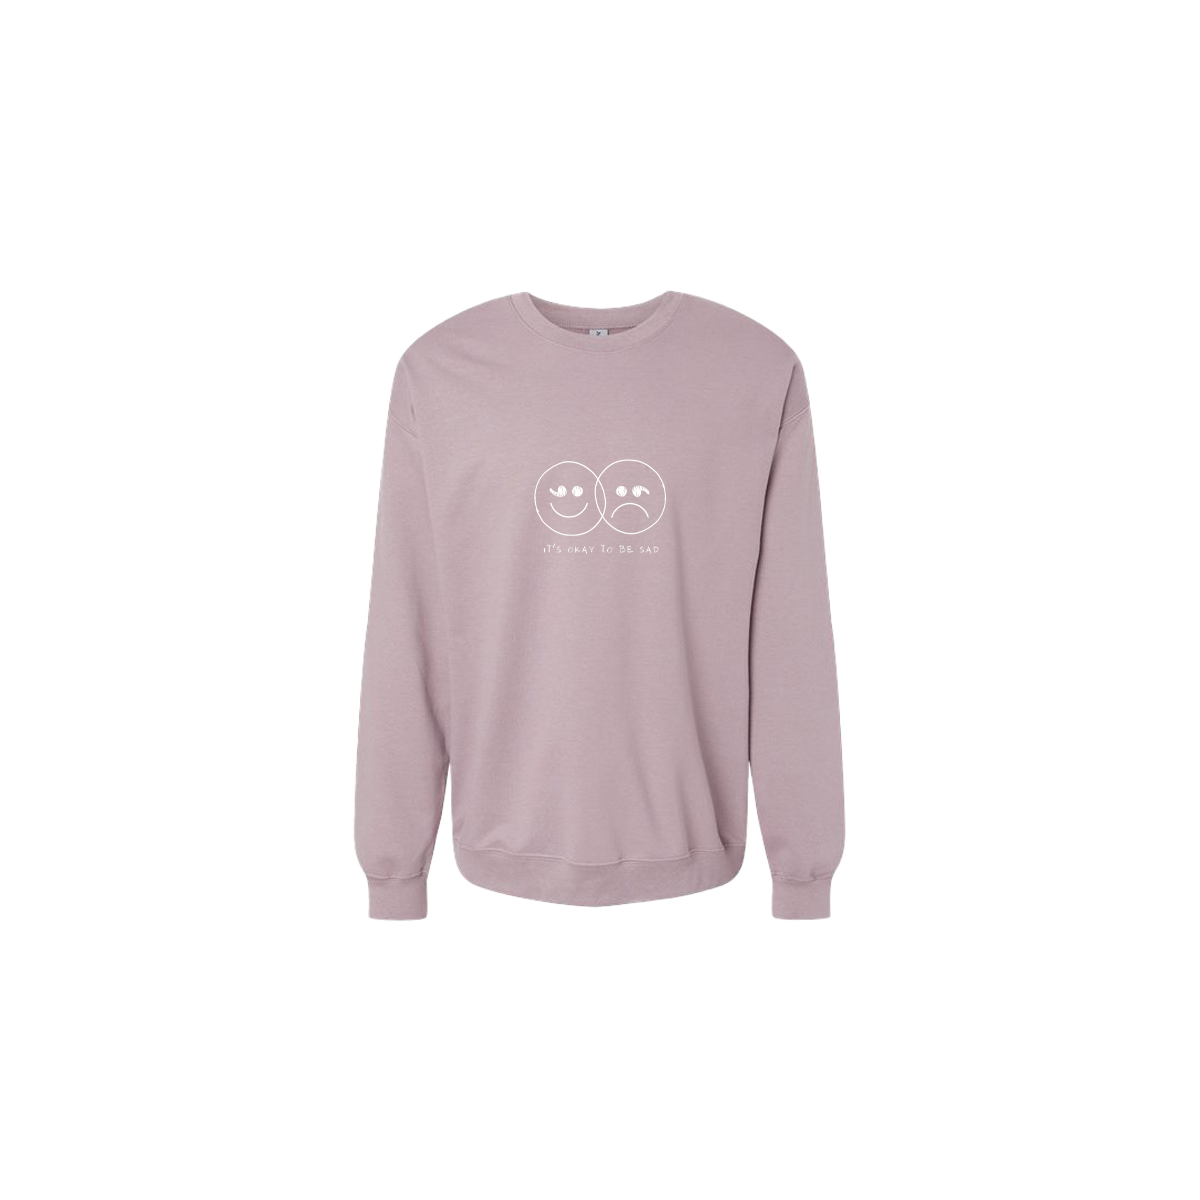 It's Okay to be Sad Double Smiley Face Embroidered Mauve Crewneck - Mental Health Awareness Clothing